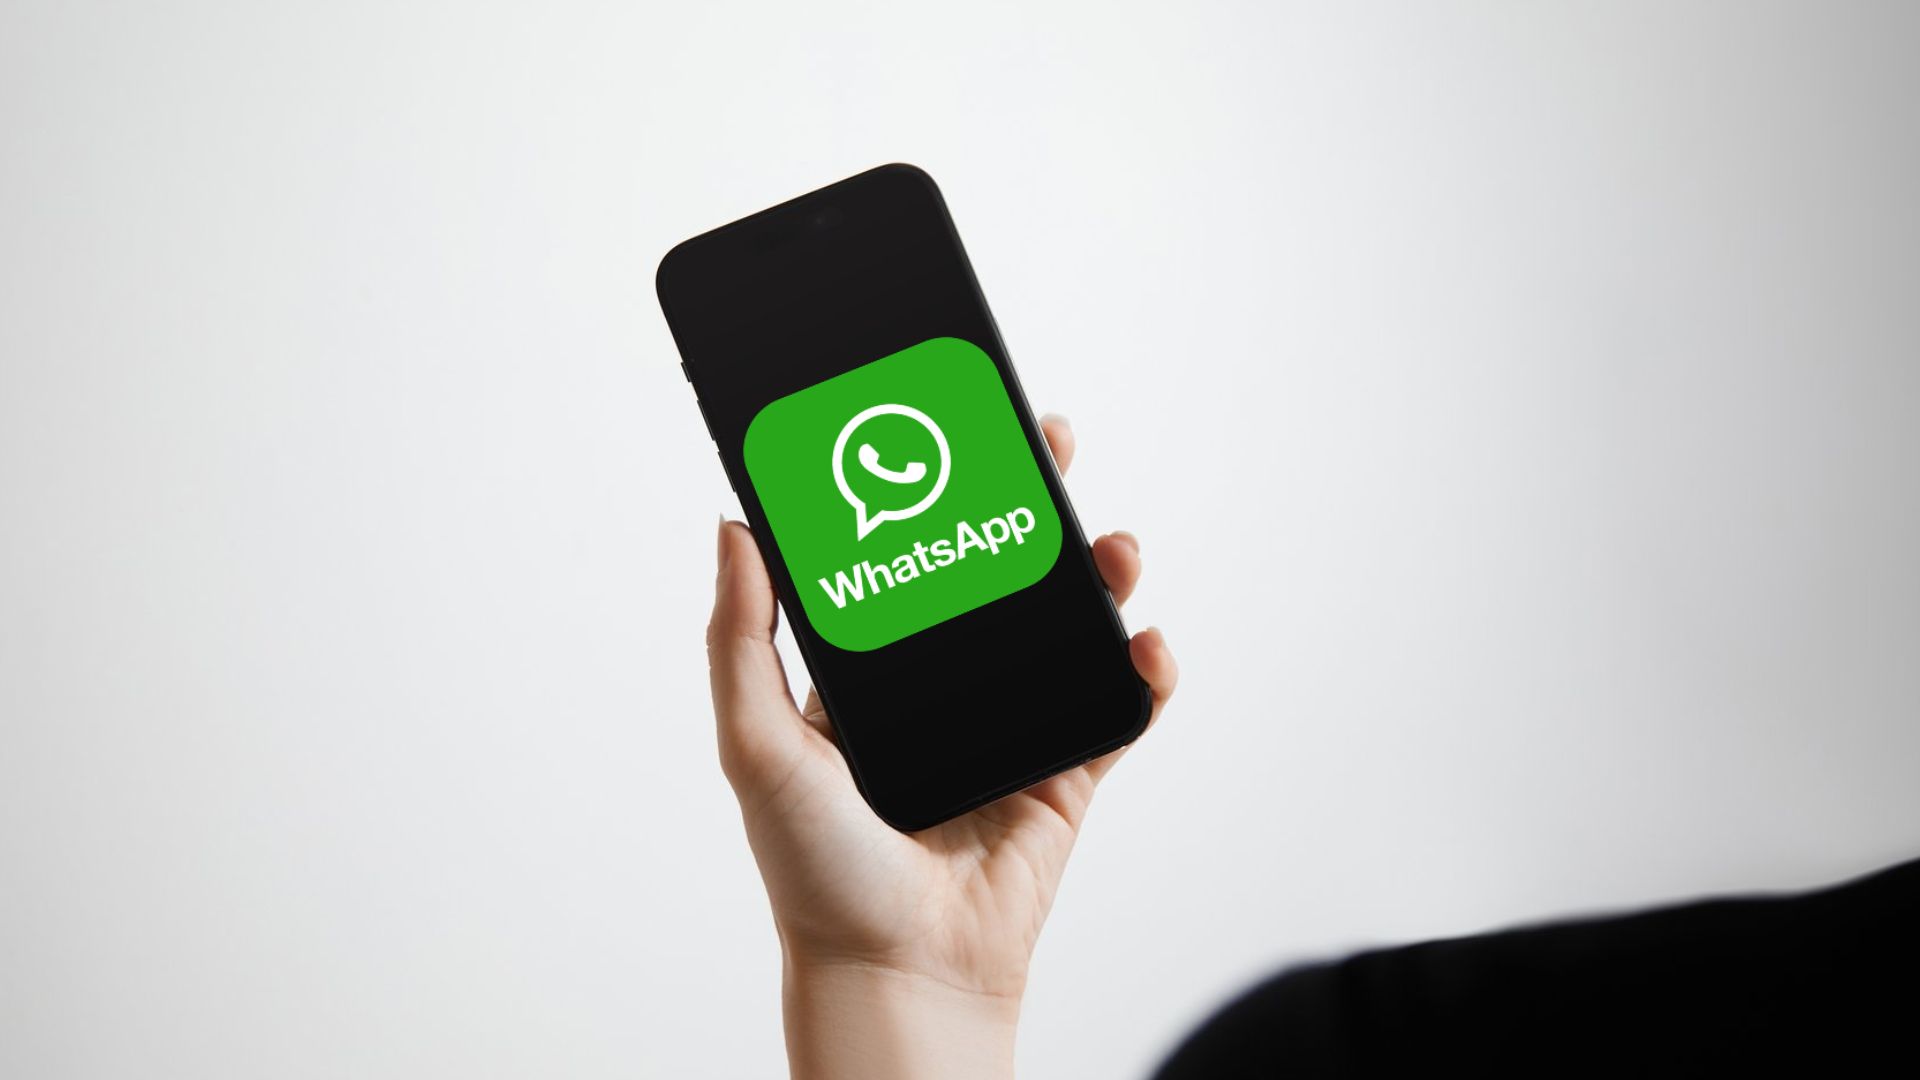 How to Change WhatsApp Number Without Notifying Contacts